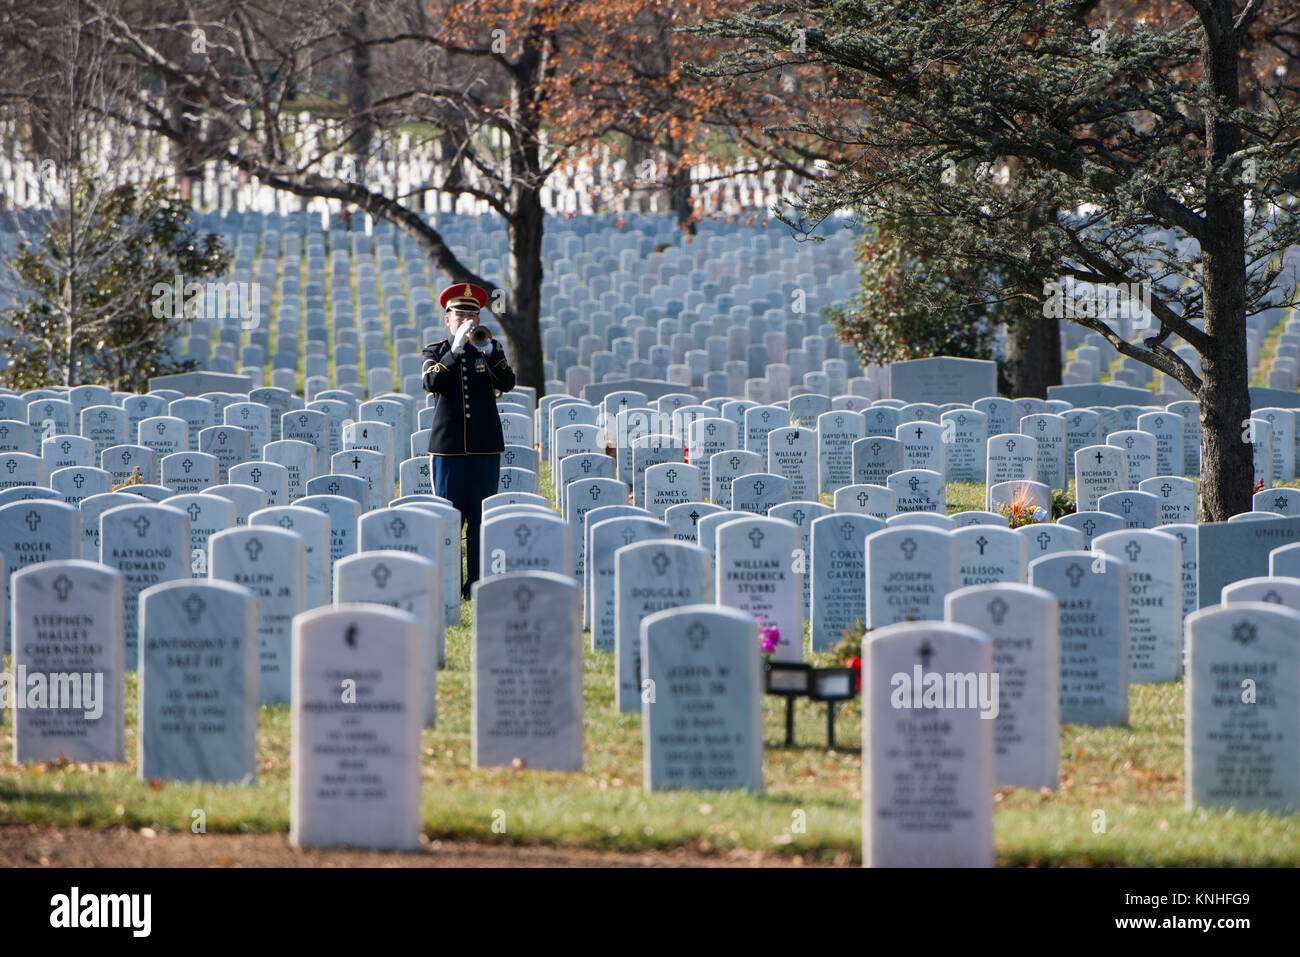 A U.S. Army Band bugler plays Taps during the graveside service for Special Forces soldier James Moriarty  at the Arlington National Cemetery December 5, 2016 in Arlington, Virginia. Moriarty was one of three Special Forces soldiers killed in Jordan in November. (photo by Rache Larue  via Planetpix) Stock Photo